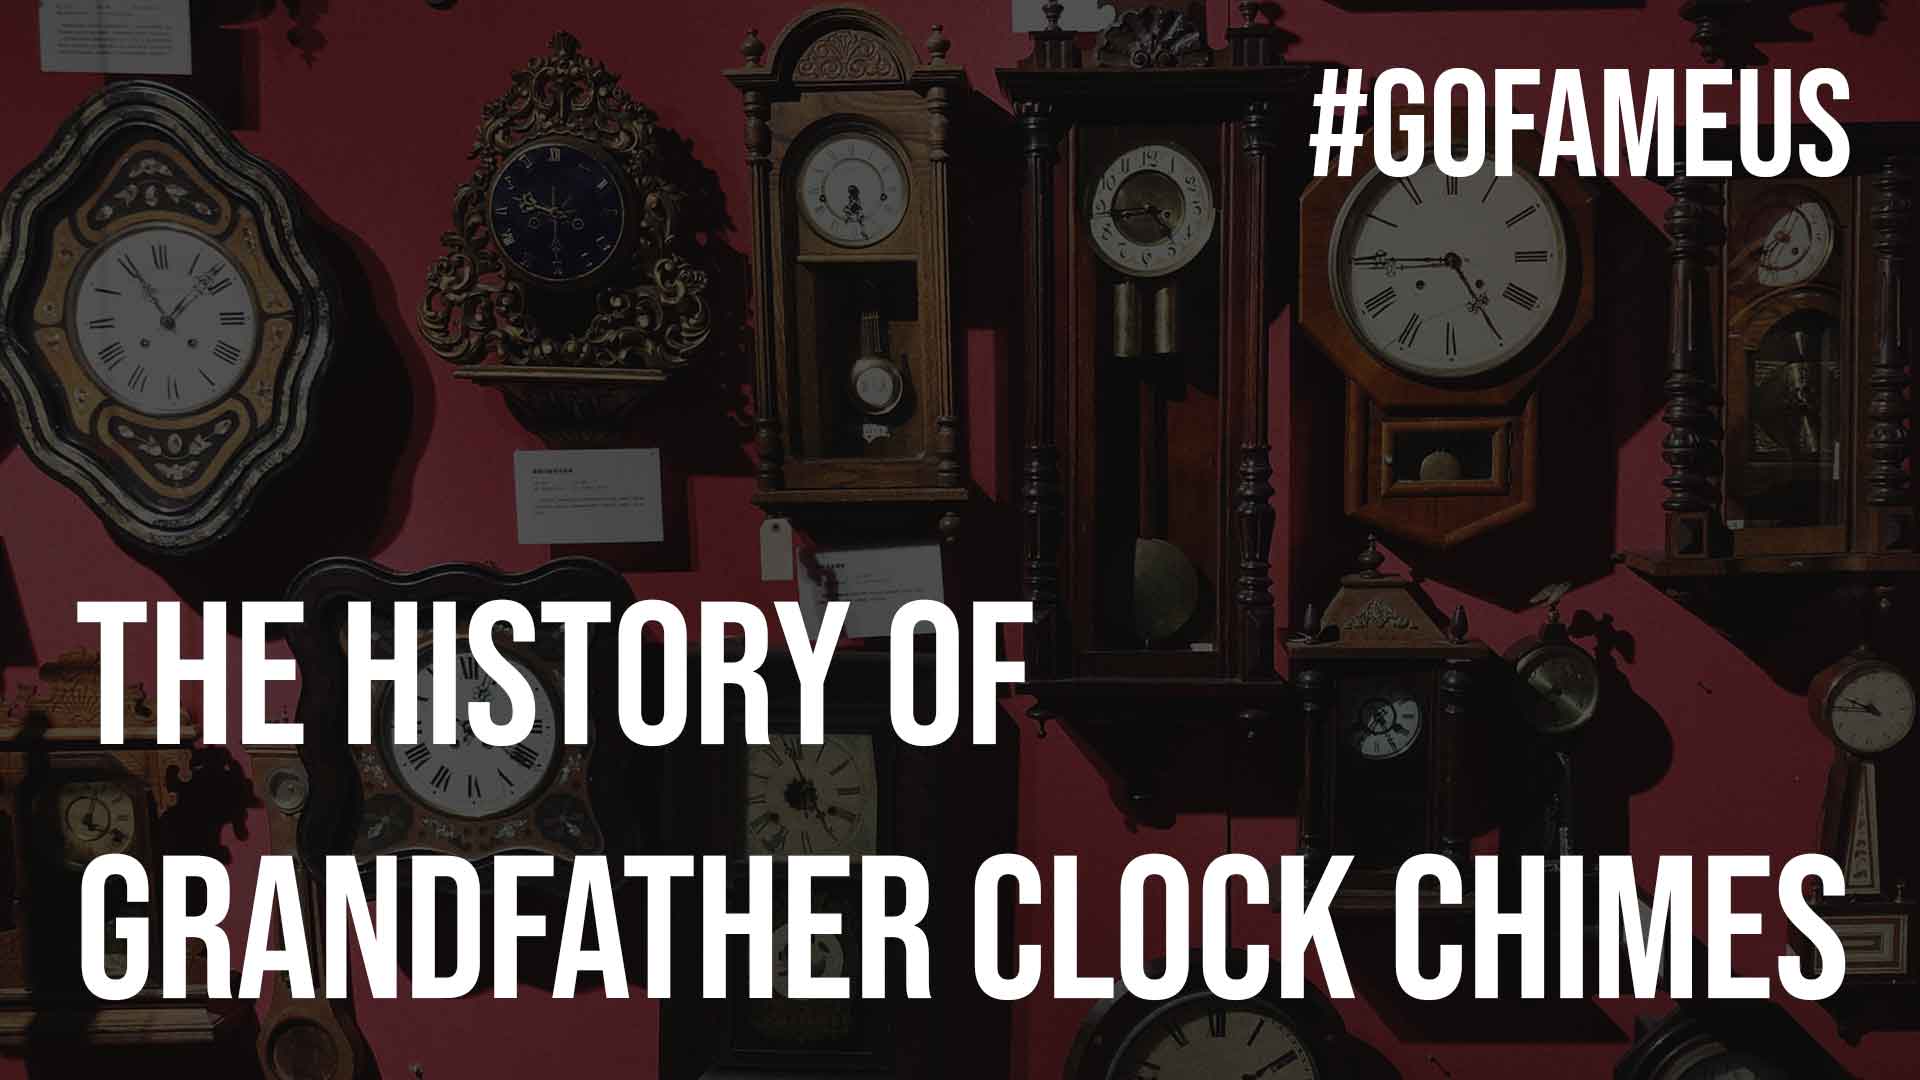 The History of Grandfather Clock Chimes